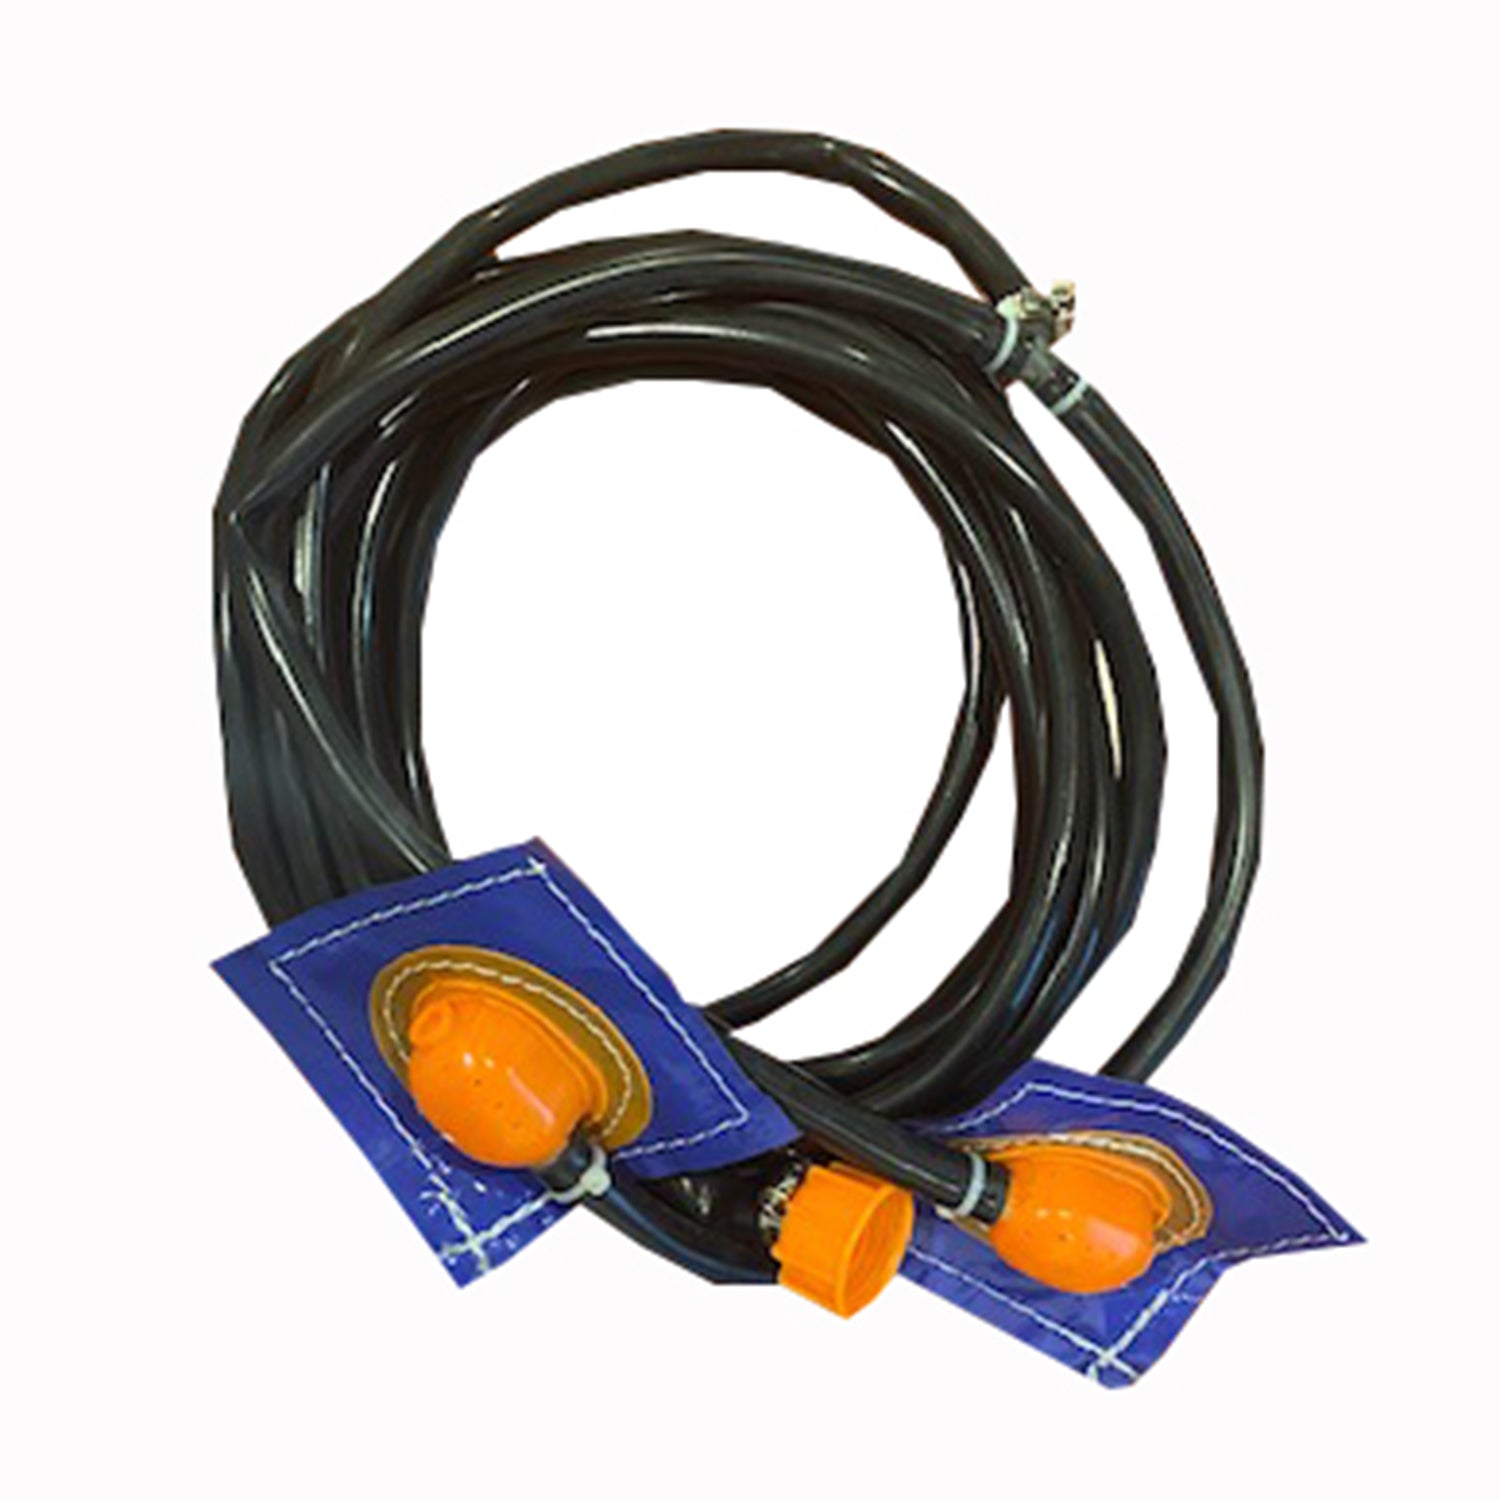 water hose for dual lane combo in blue and orange